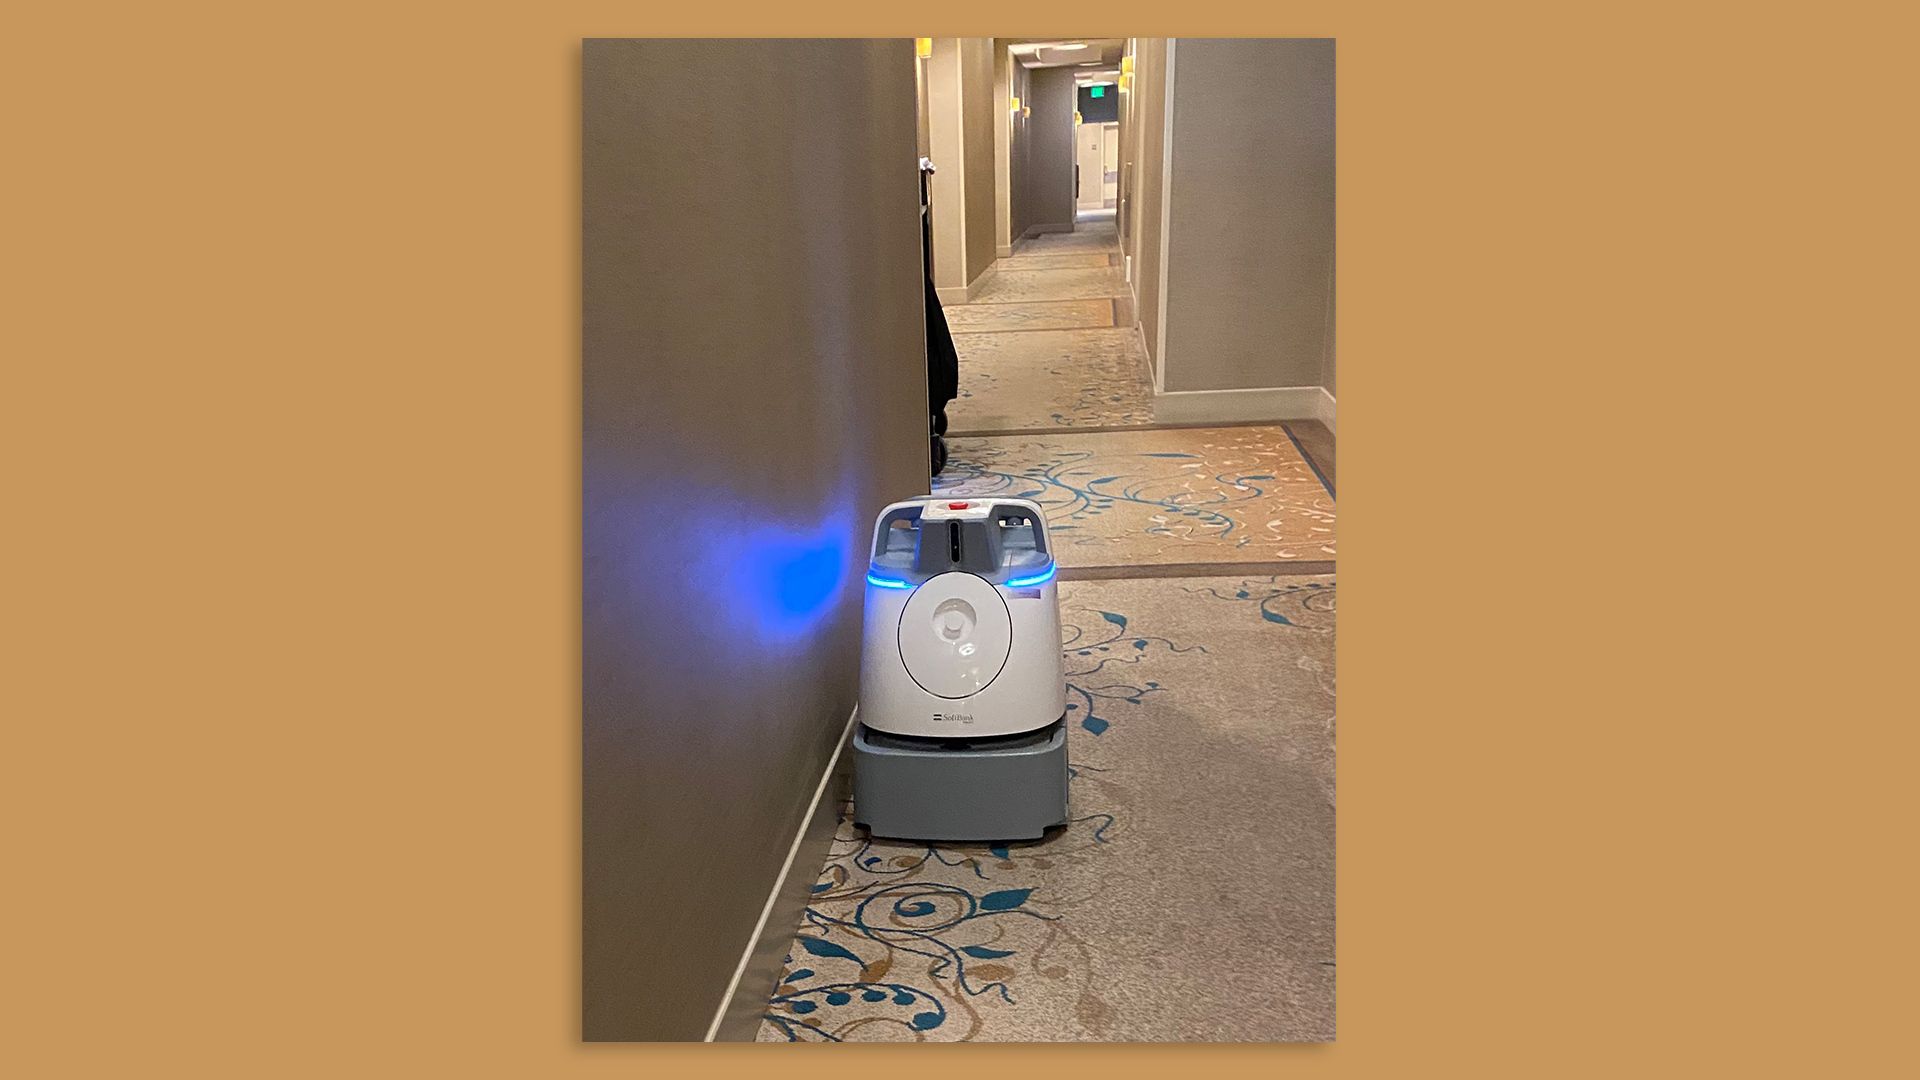 A robot carpet cleaner in a hotel hallway